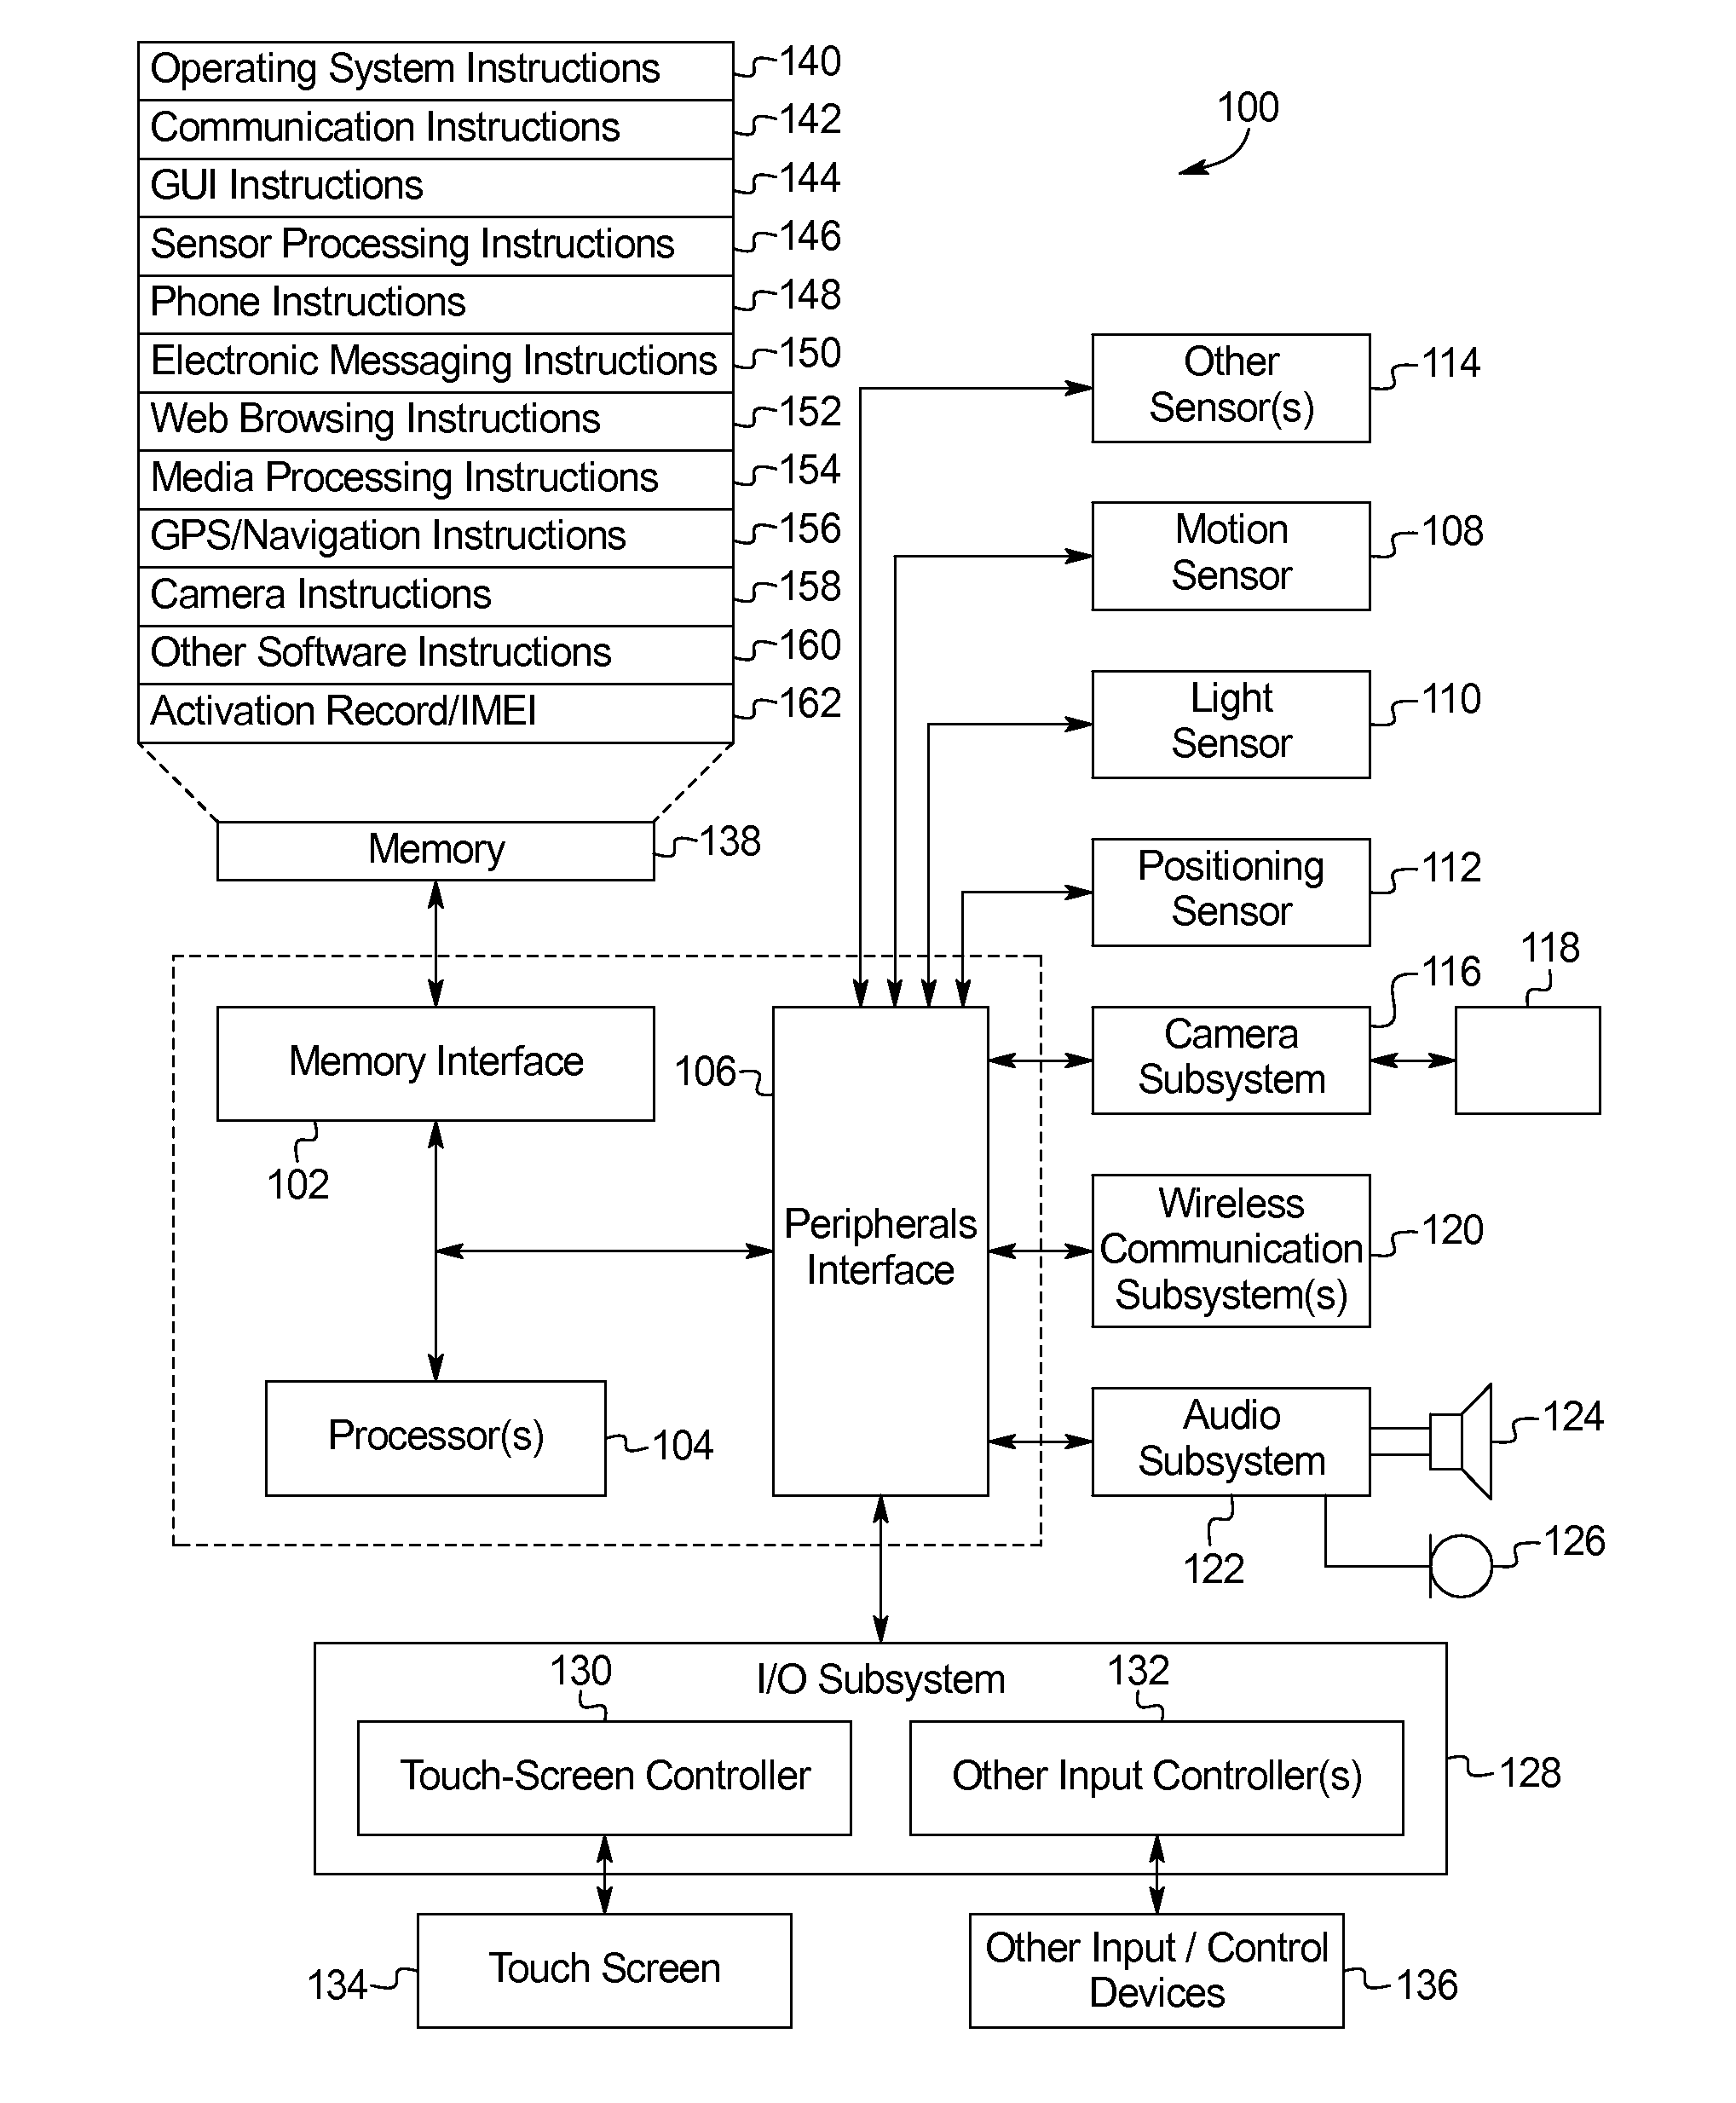 Systems and Methods for Processing Structured Data from a Document Image